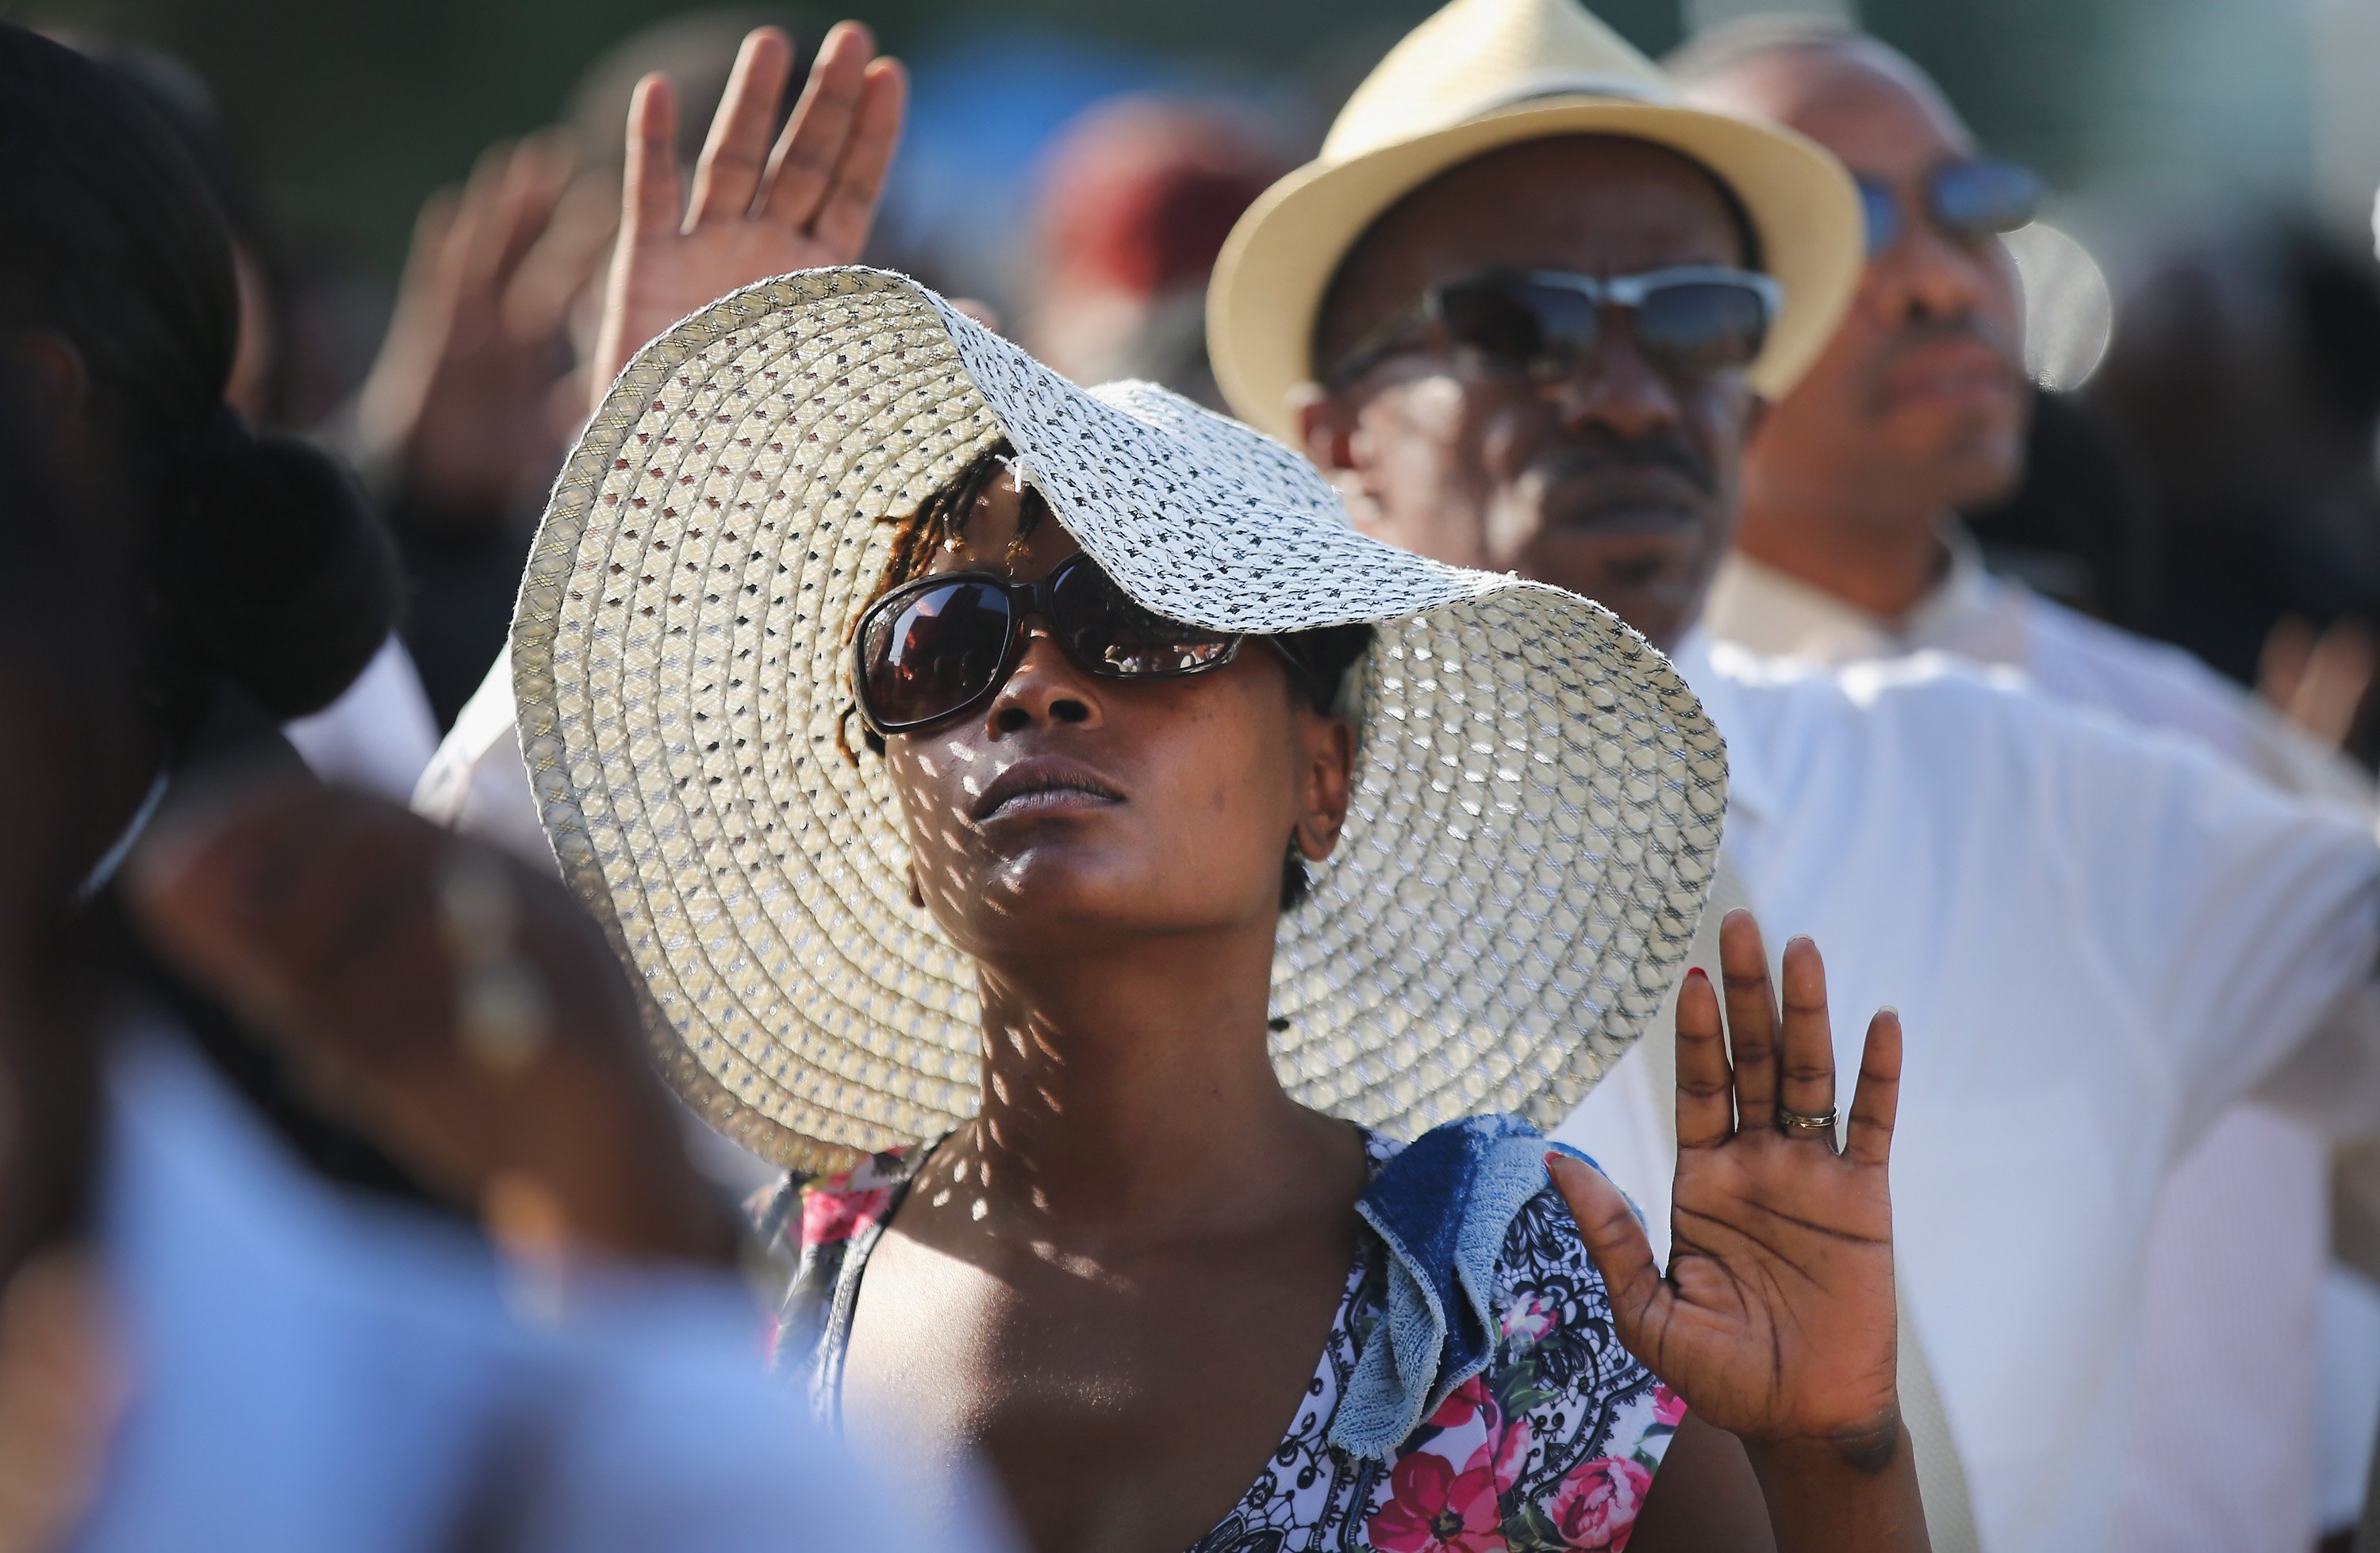 Guests raise their hands as they wait in line to enter the funeral of Michael Brown at the Friendly Temple Missionary Baptist Church in St. Louis on Aug. 25, 2014. (Scott Olson—Getty Images)